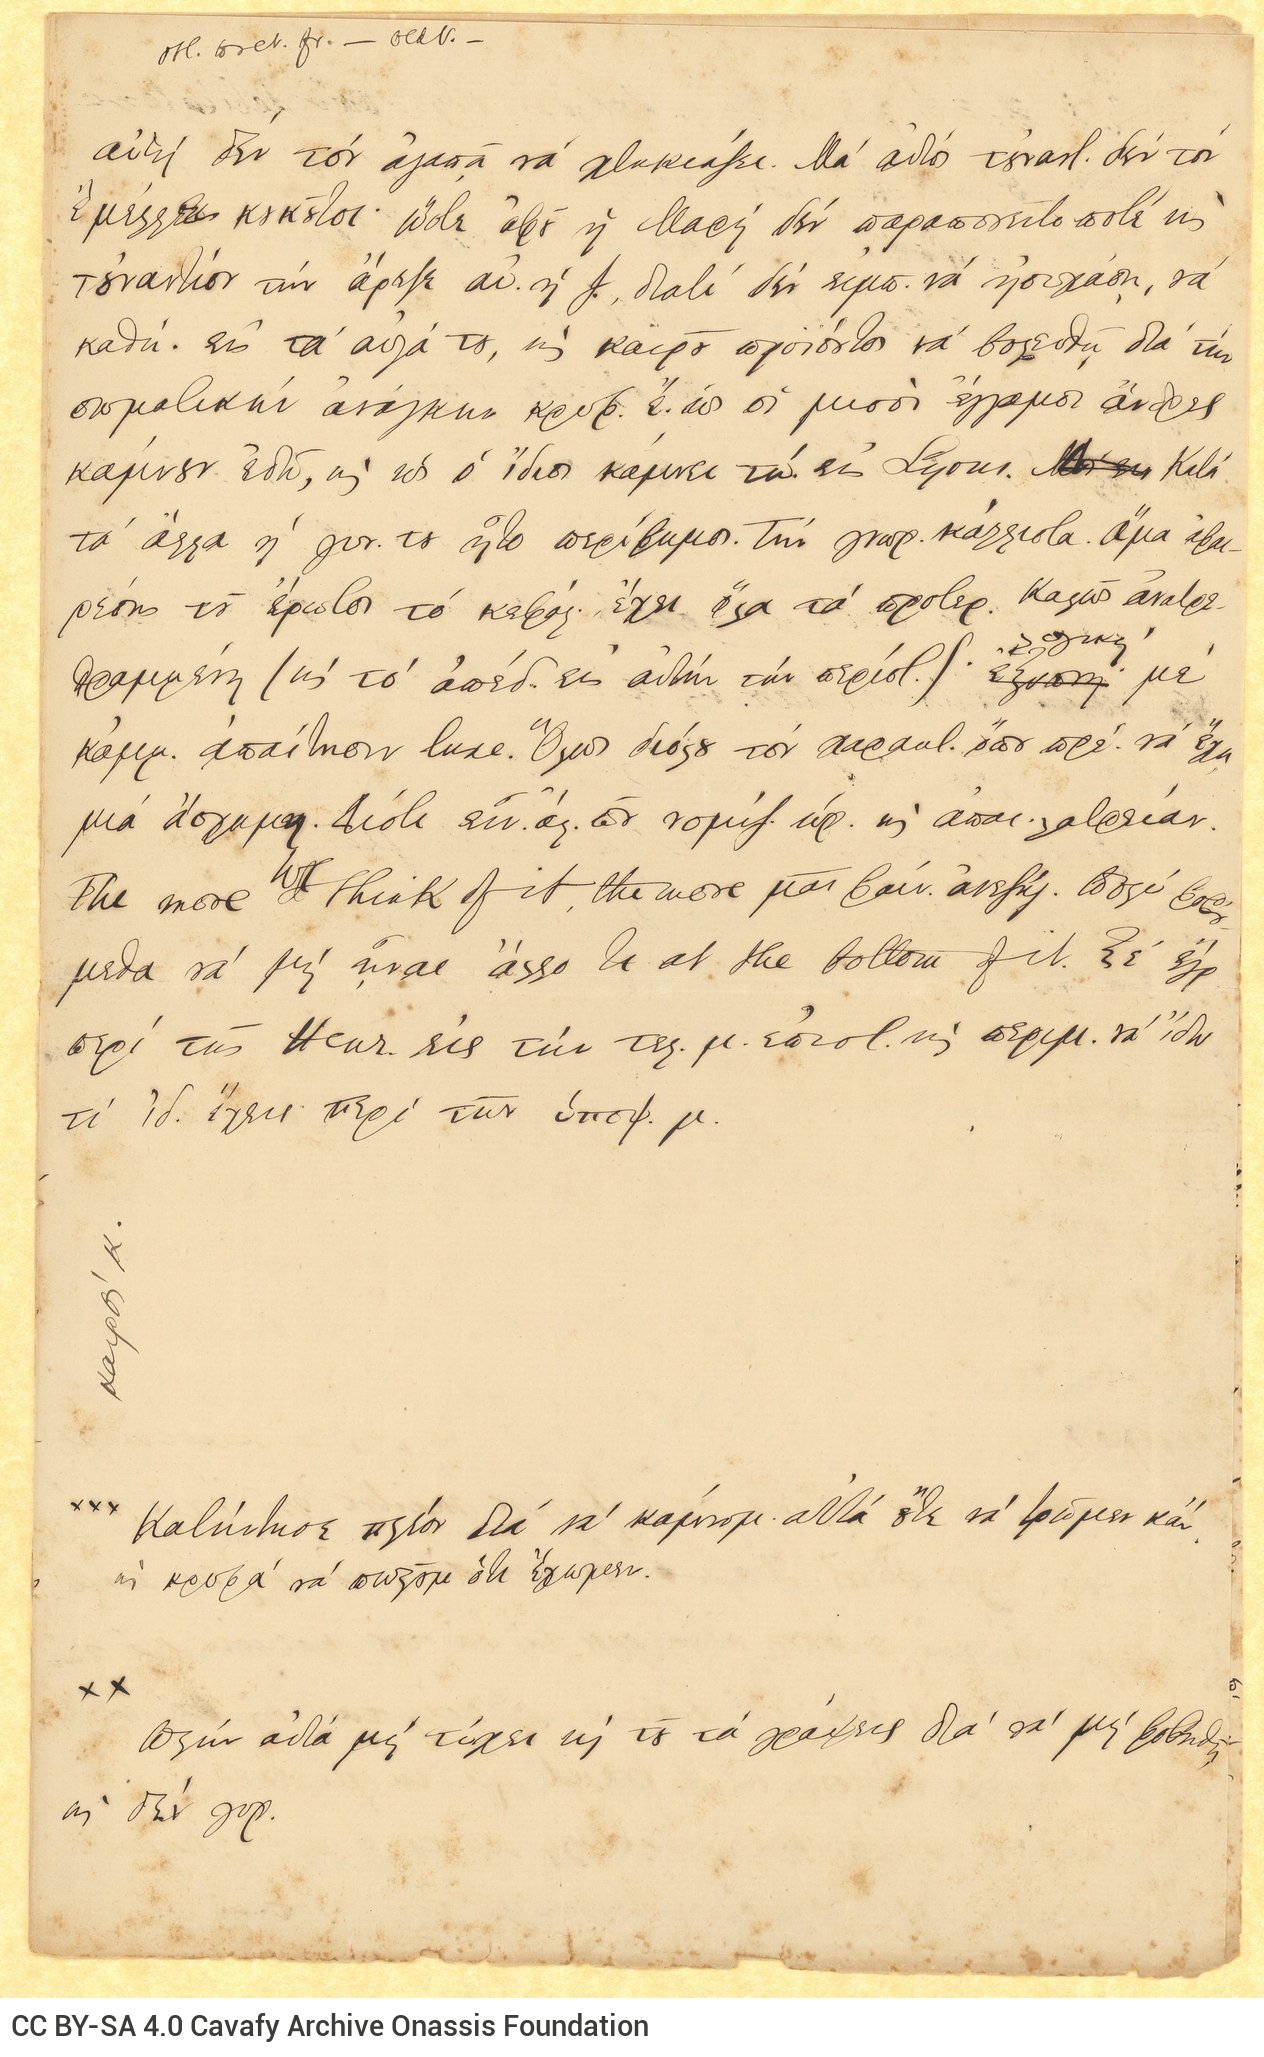 Handwritten draft letter by C. P. Cavafy to his brother George ("23 Sept.") from the 1889 correspondence series, on two sheet